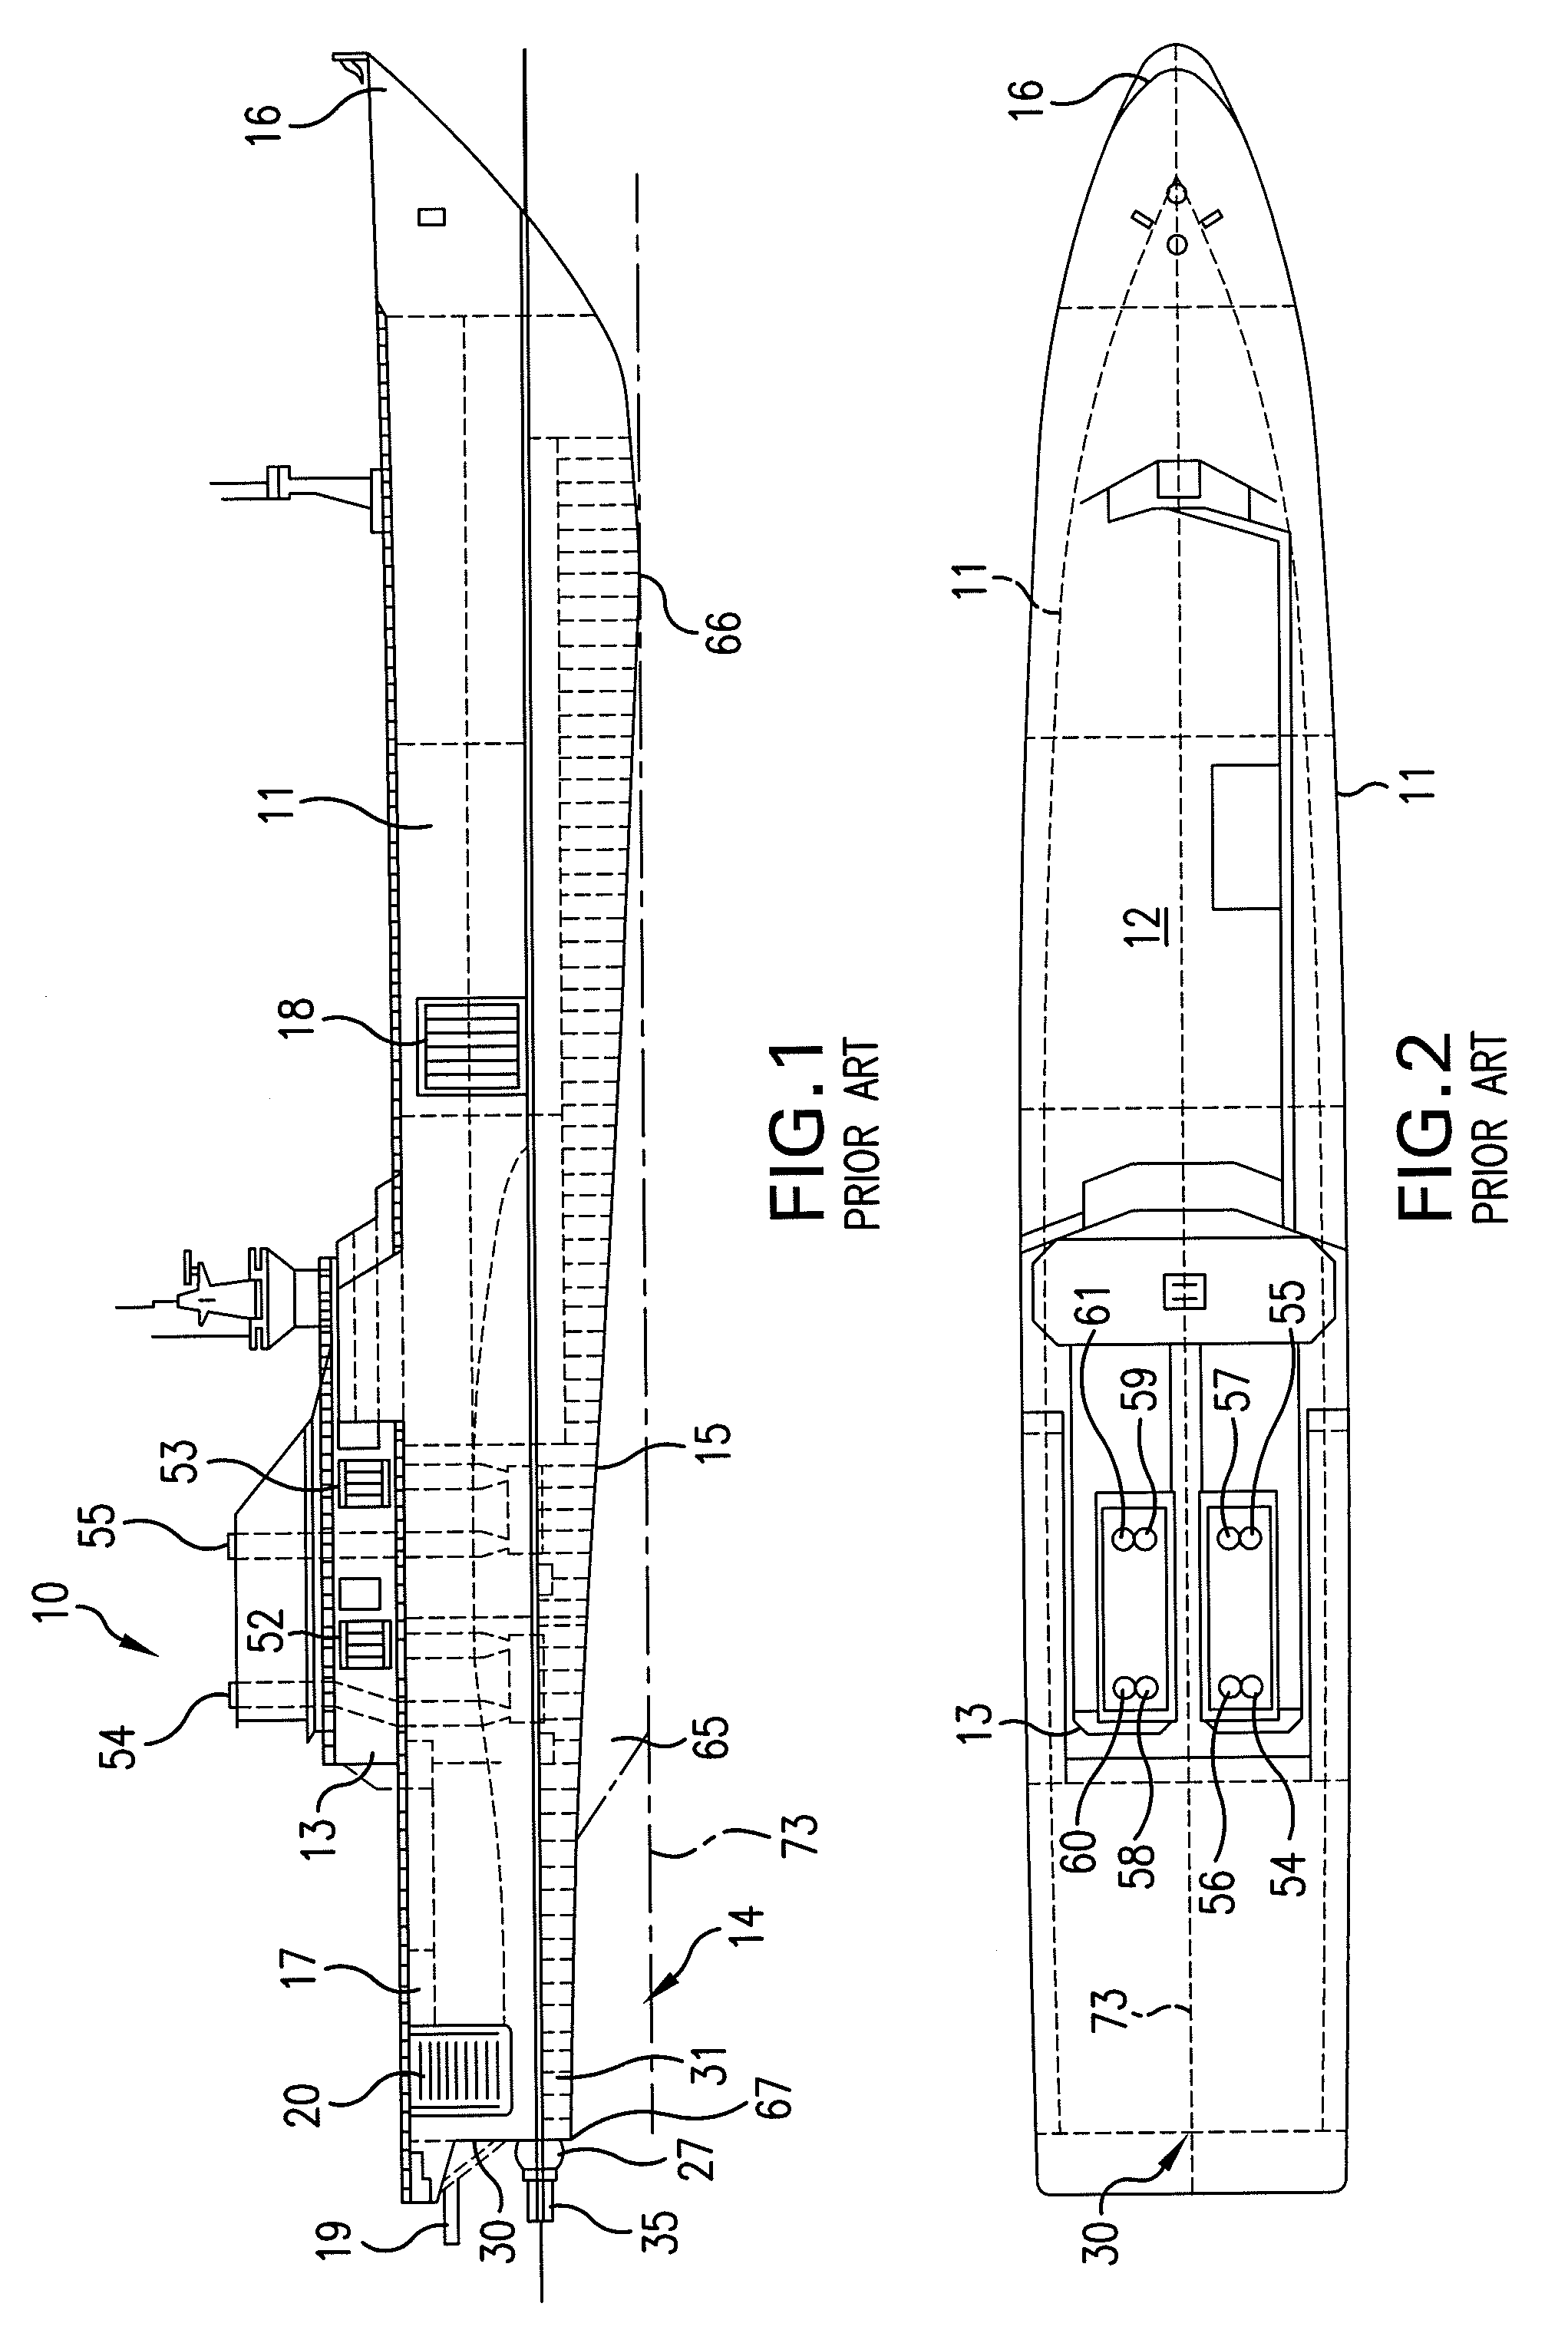 System for rapid, secure transport of cargo by sea, and monohull fast ship and arrangement and method for loading and unloading cargo on a ship